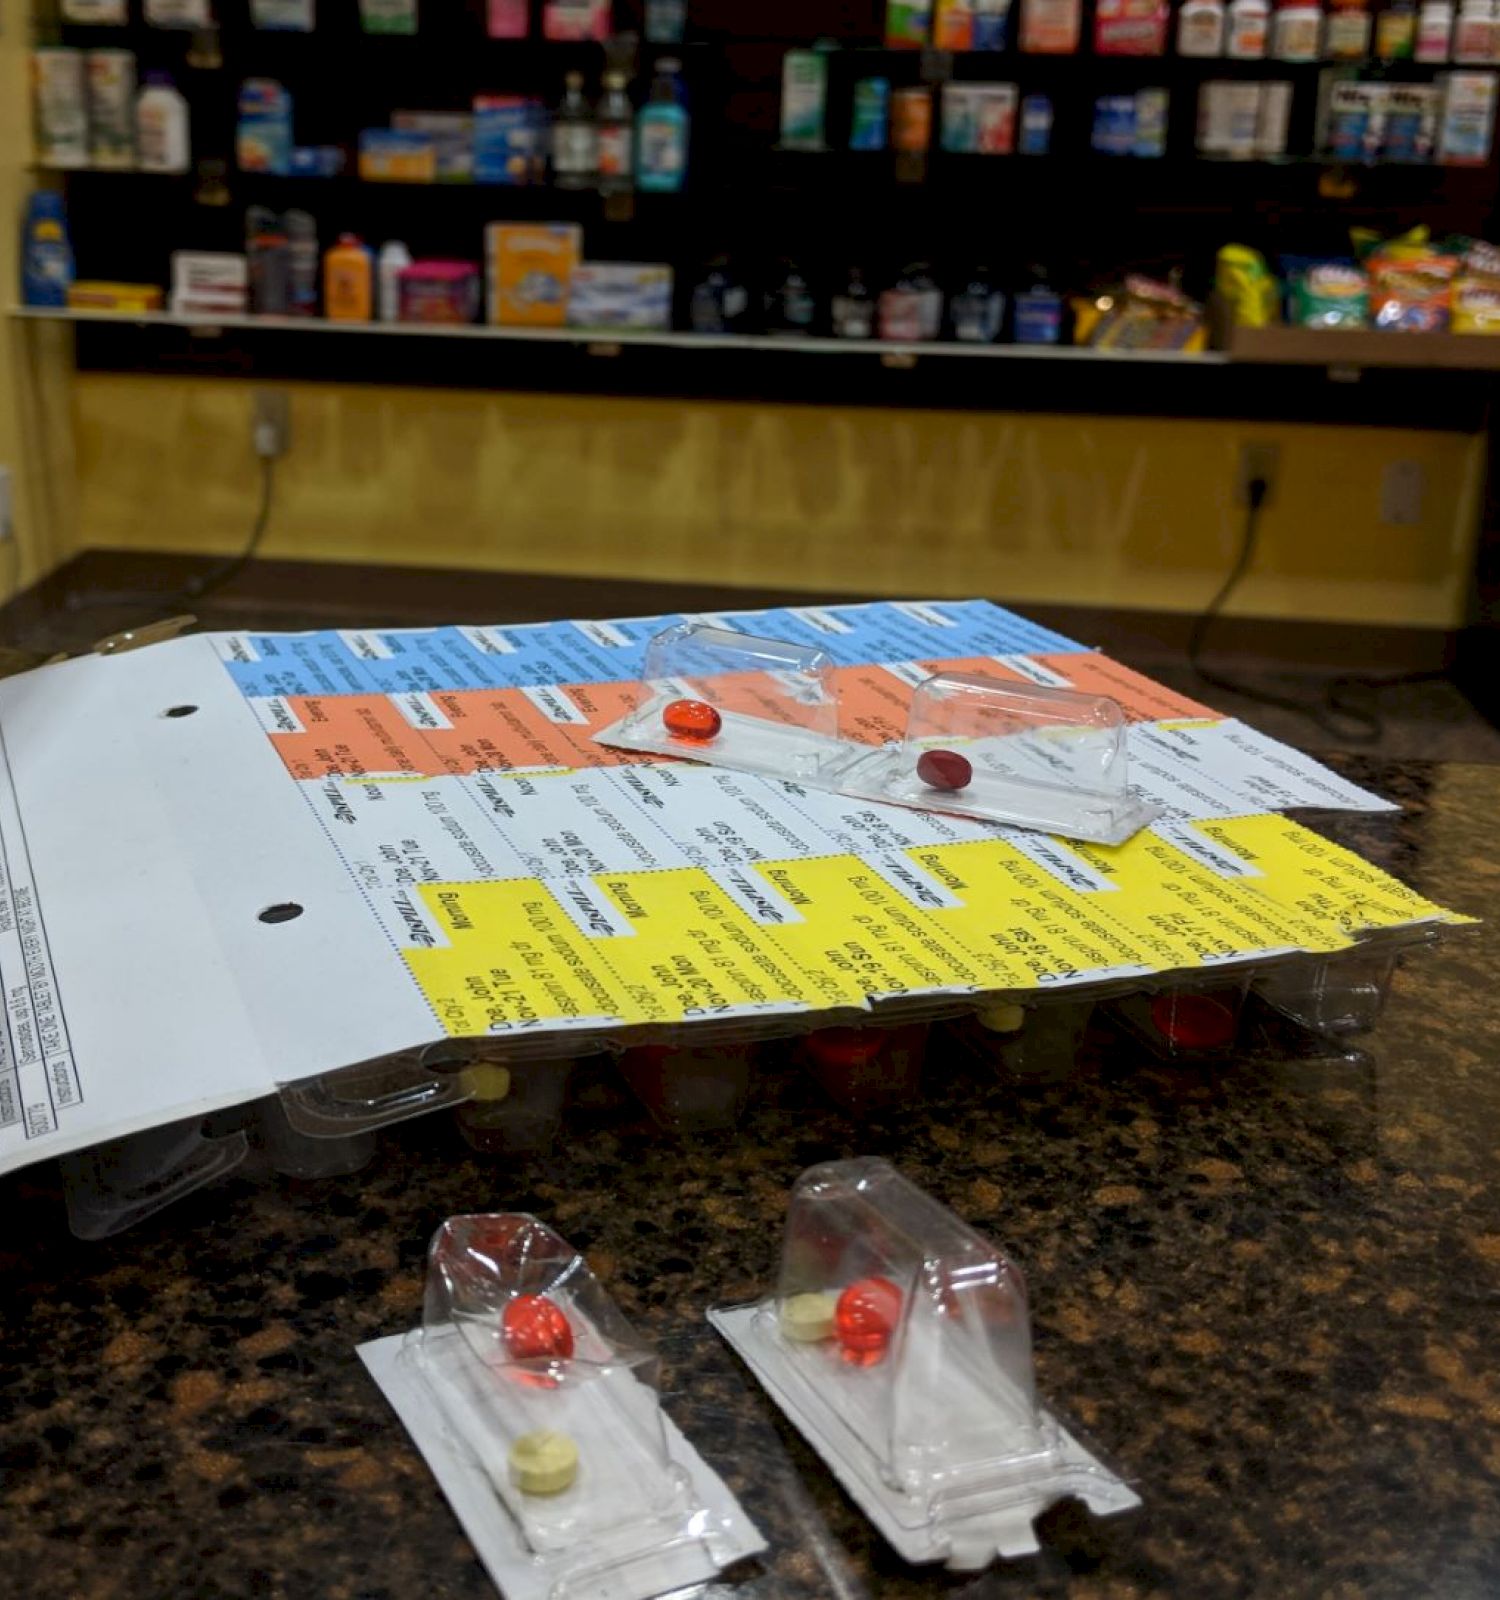 A close-up of medication blister packs on a countertop; a well-stocked pharmacy shelf is visible in the background.